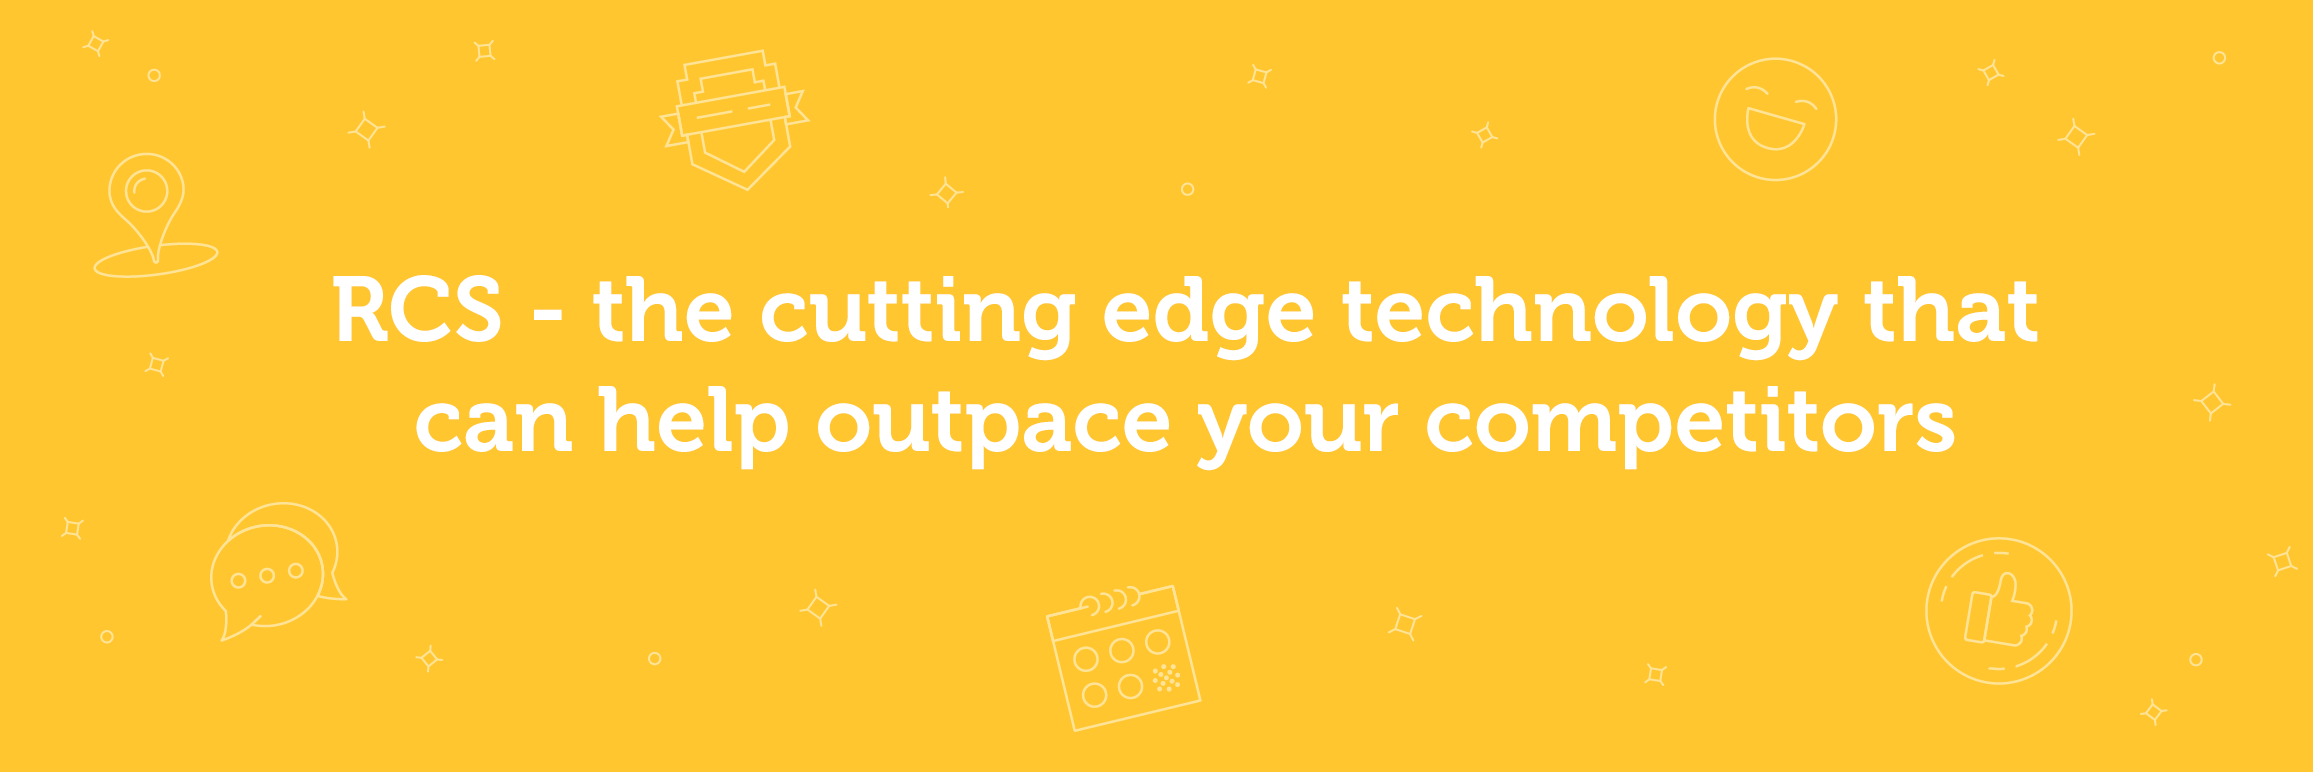 RCS - the cutting edge technology that can help outpace your competitors